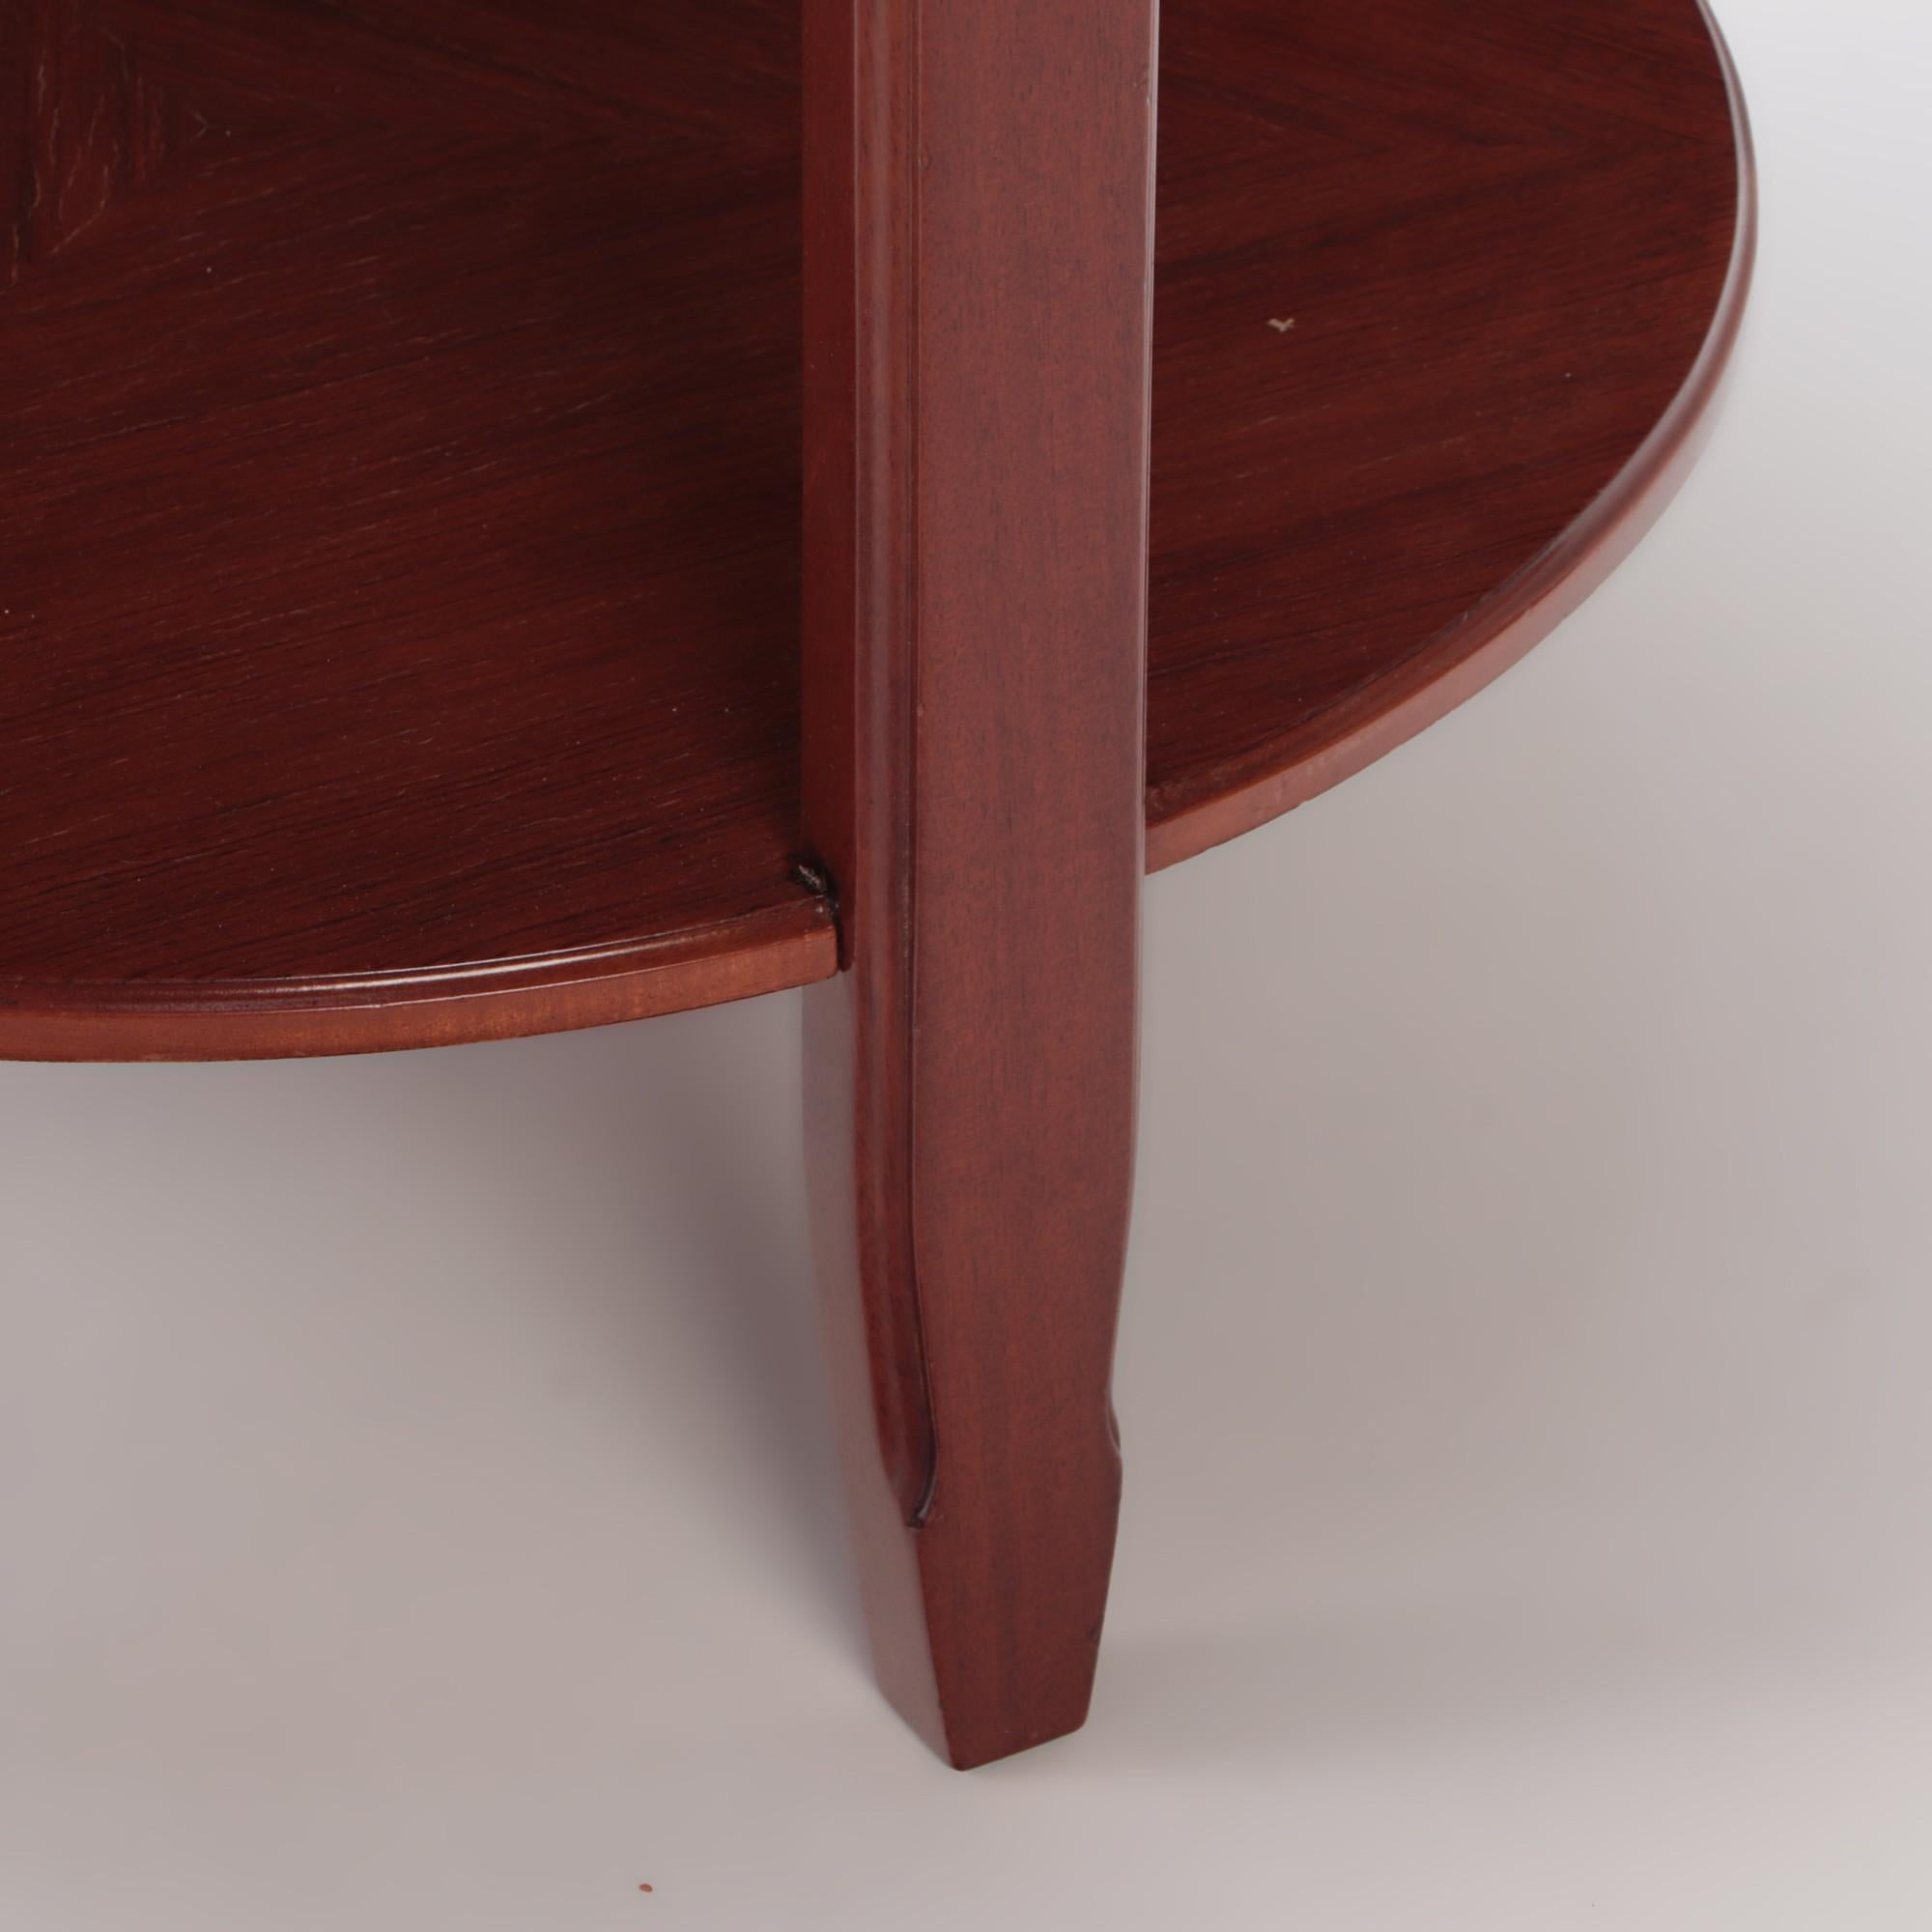 French Art Deco Mahogany Side Table by Louis Majorelle, Signed, Circa 1930 For Sale 1